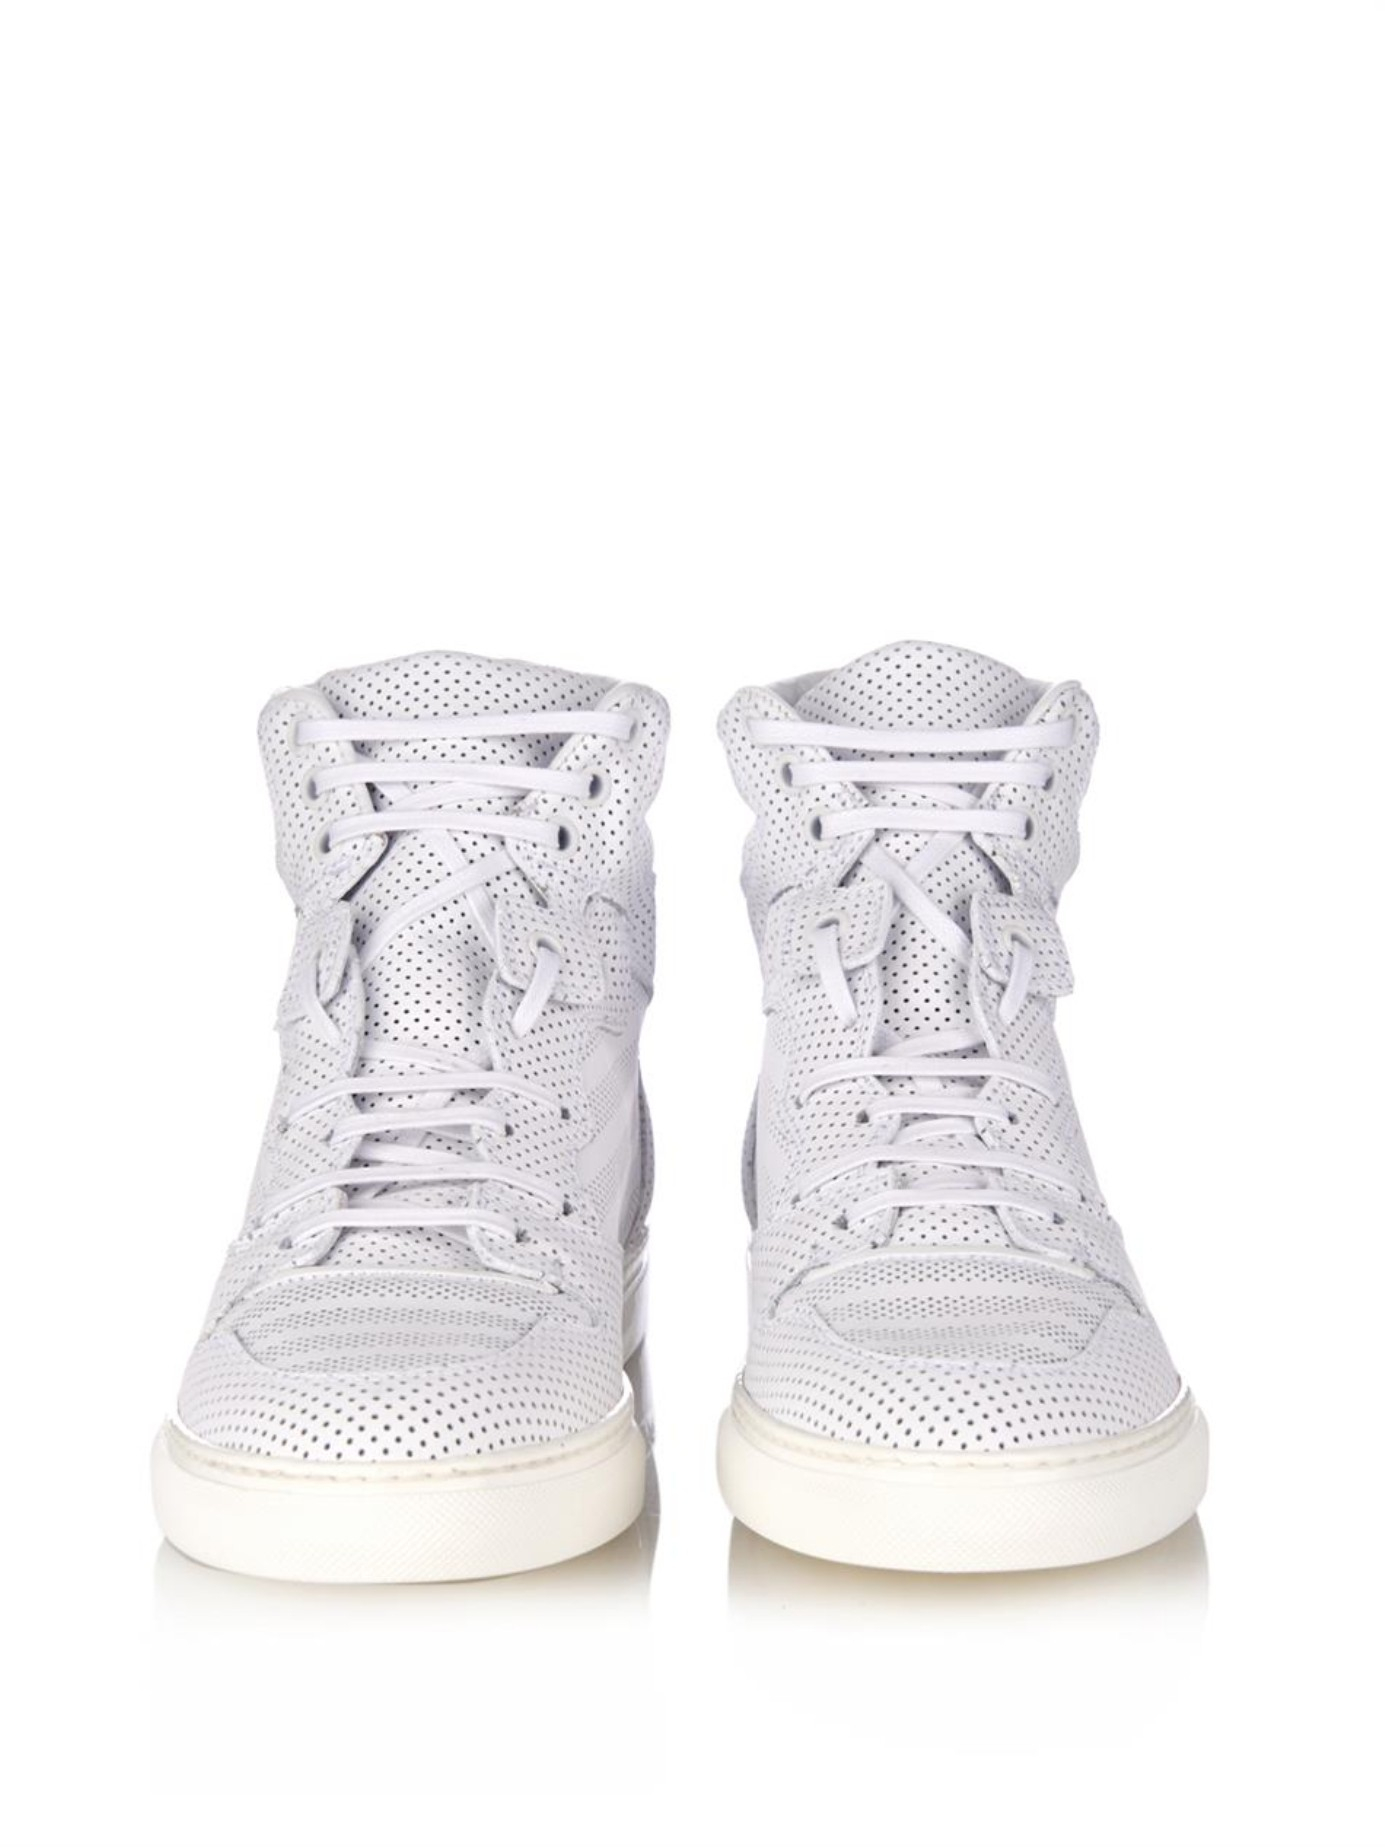 Monochrome Perforated High-Top Trainers in Lyst